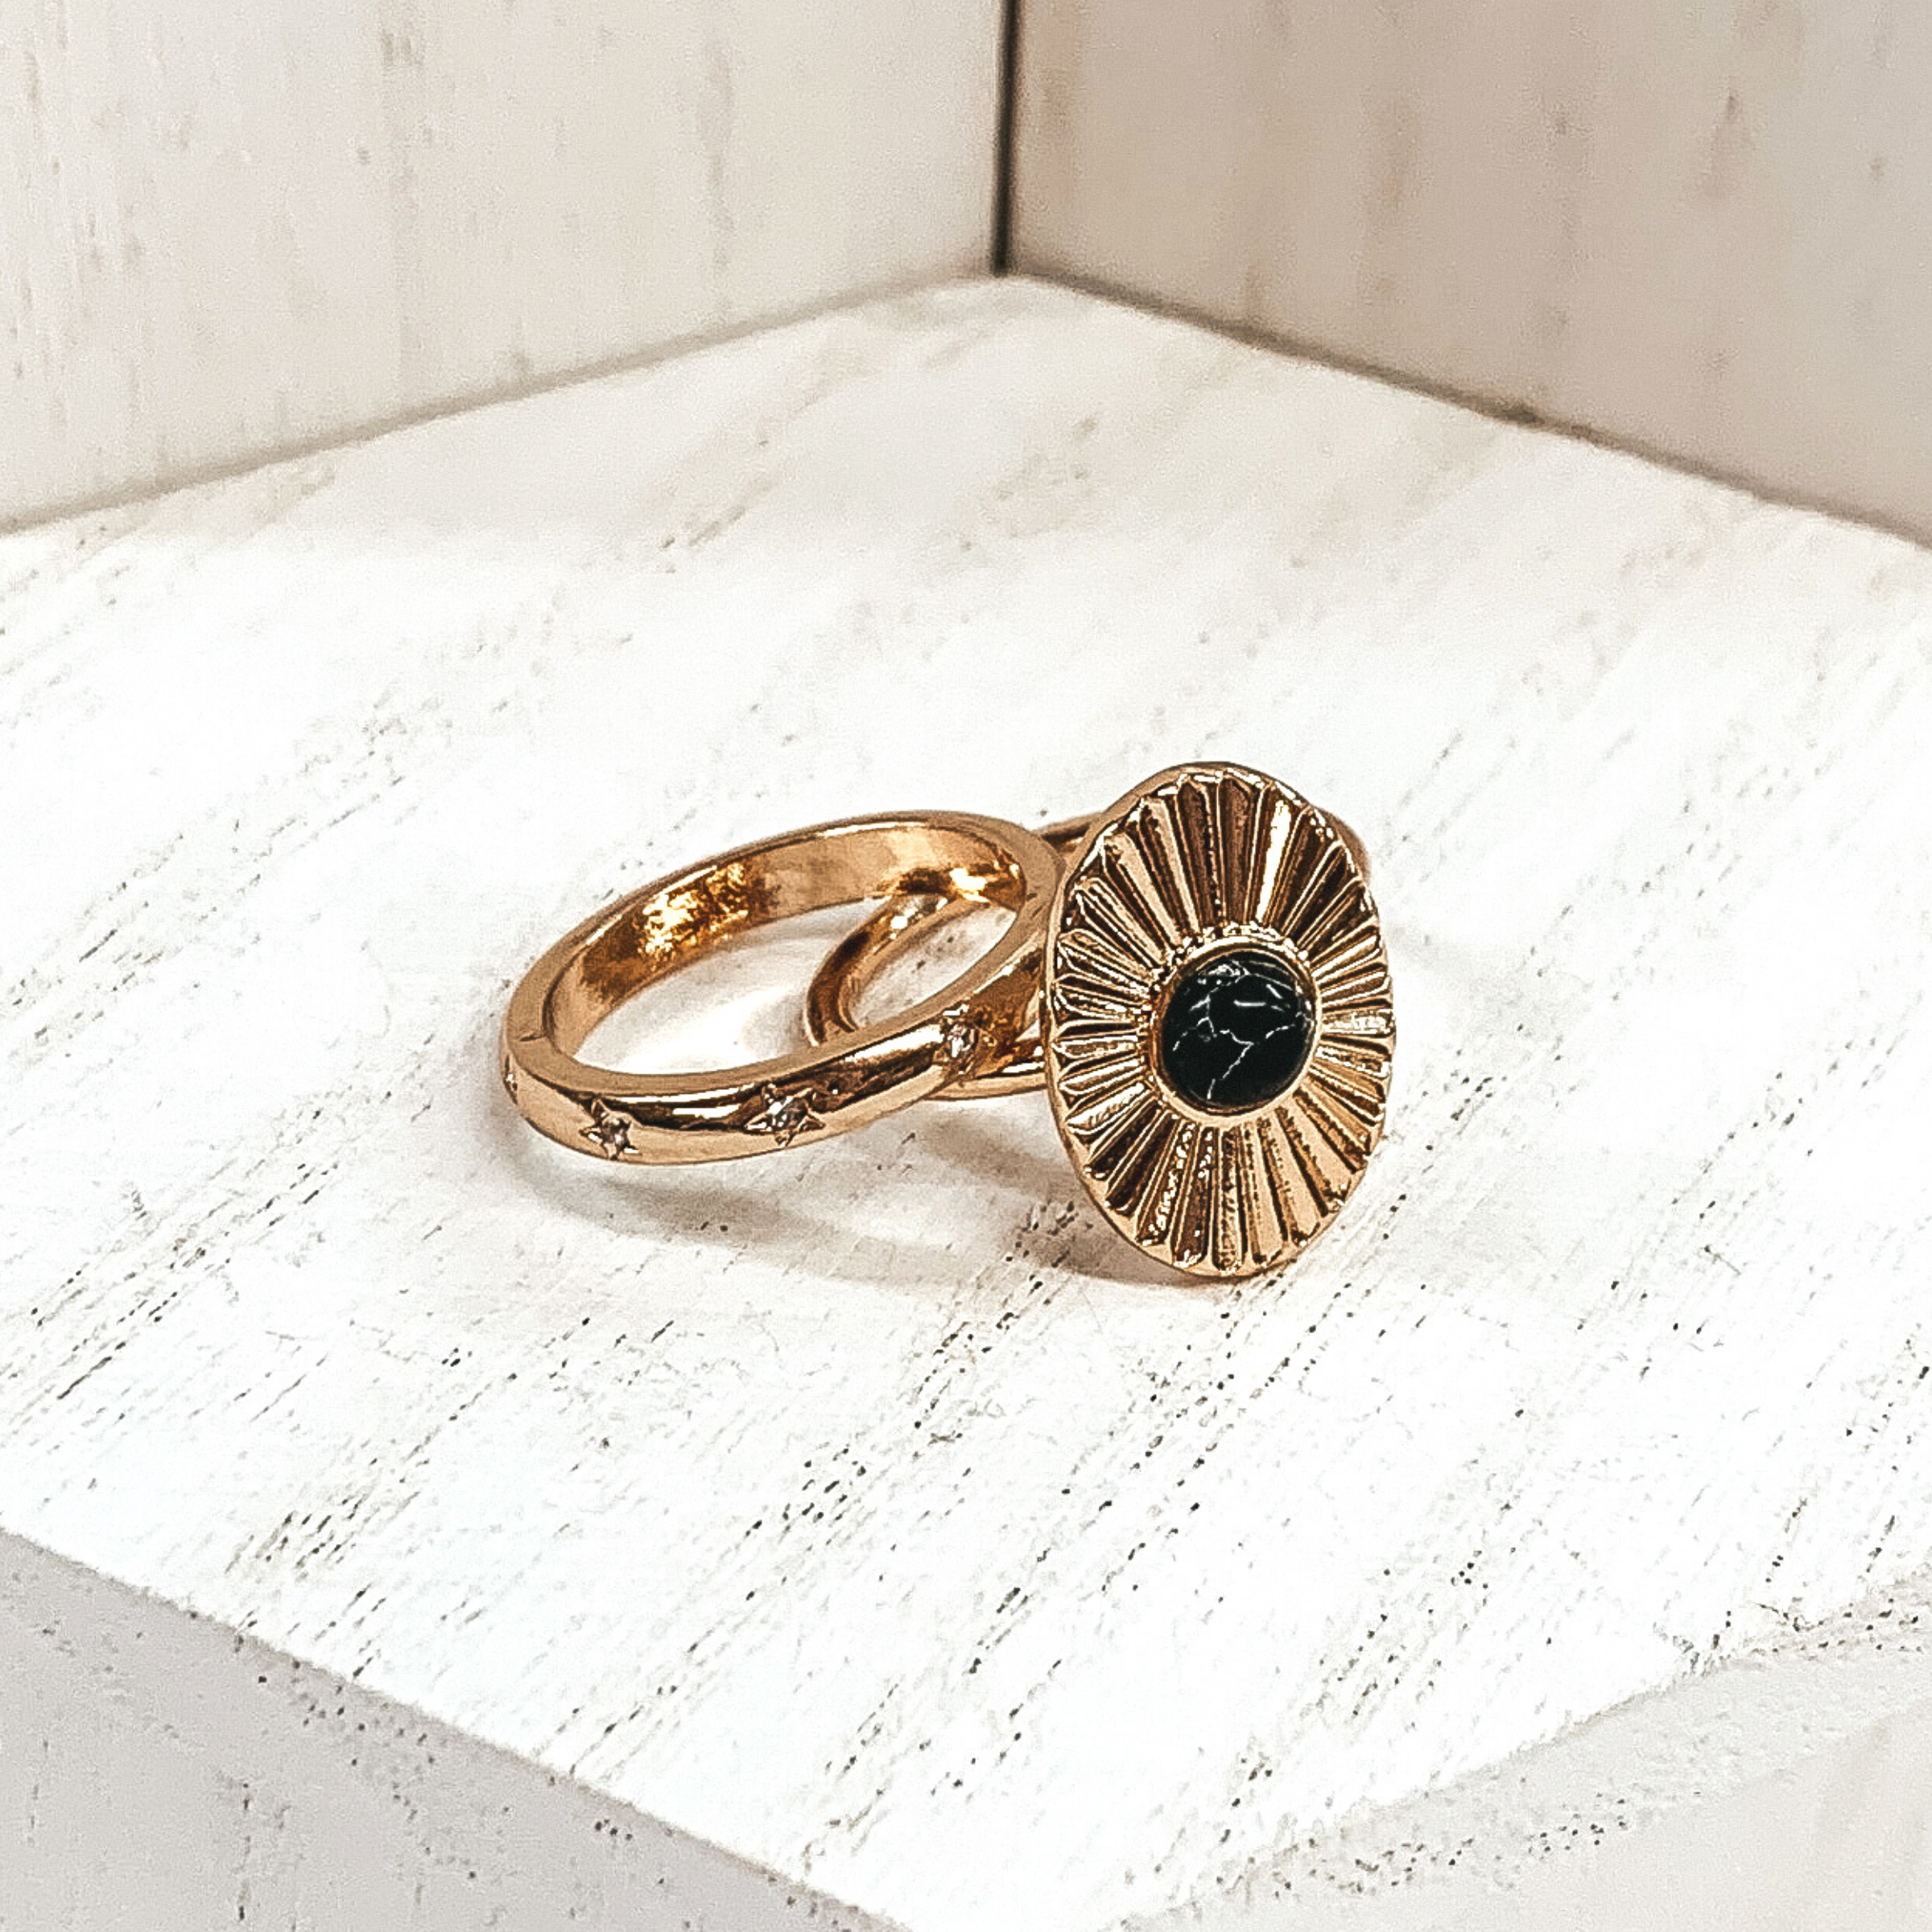 Both rings are gold in color. The first ring has an oval pendant with a starburst design on it and a center black stone. The second ring has tiny engraved stars with clear crystals in the center of them These rings are pictured on a white background.